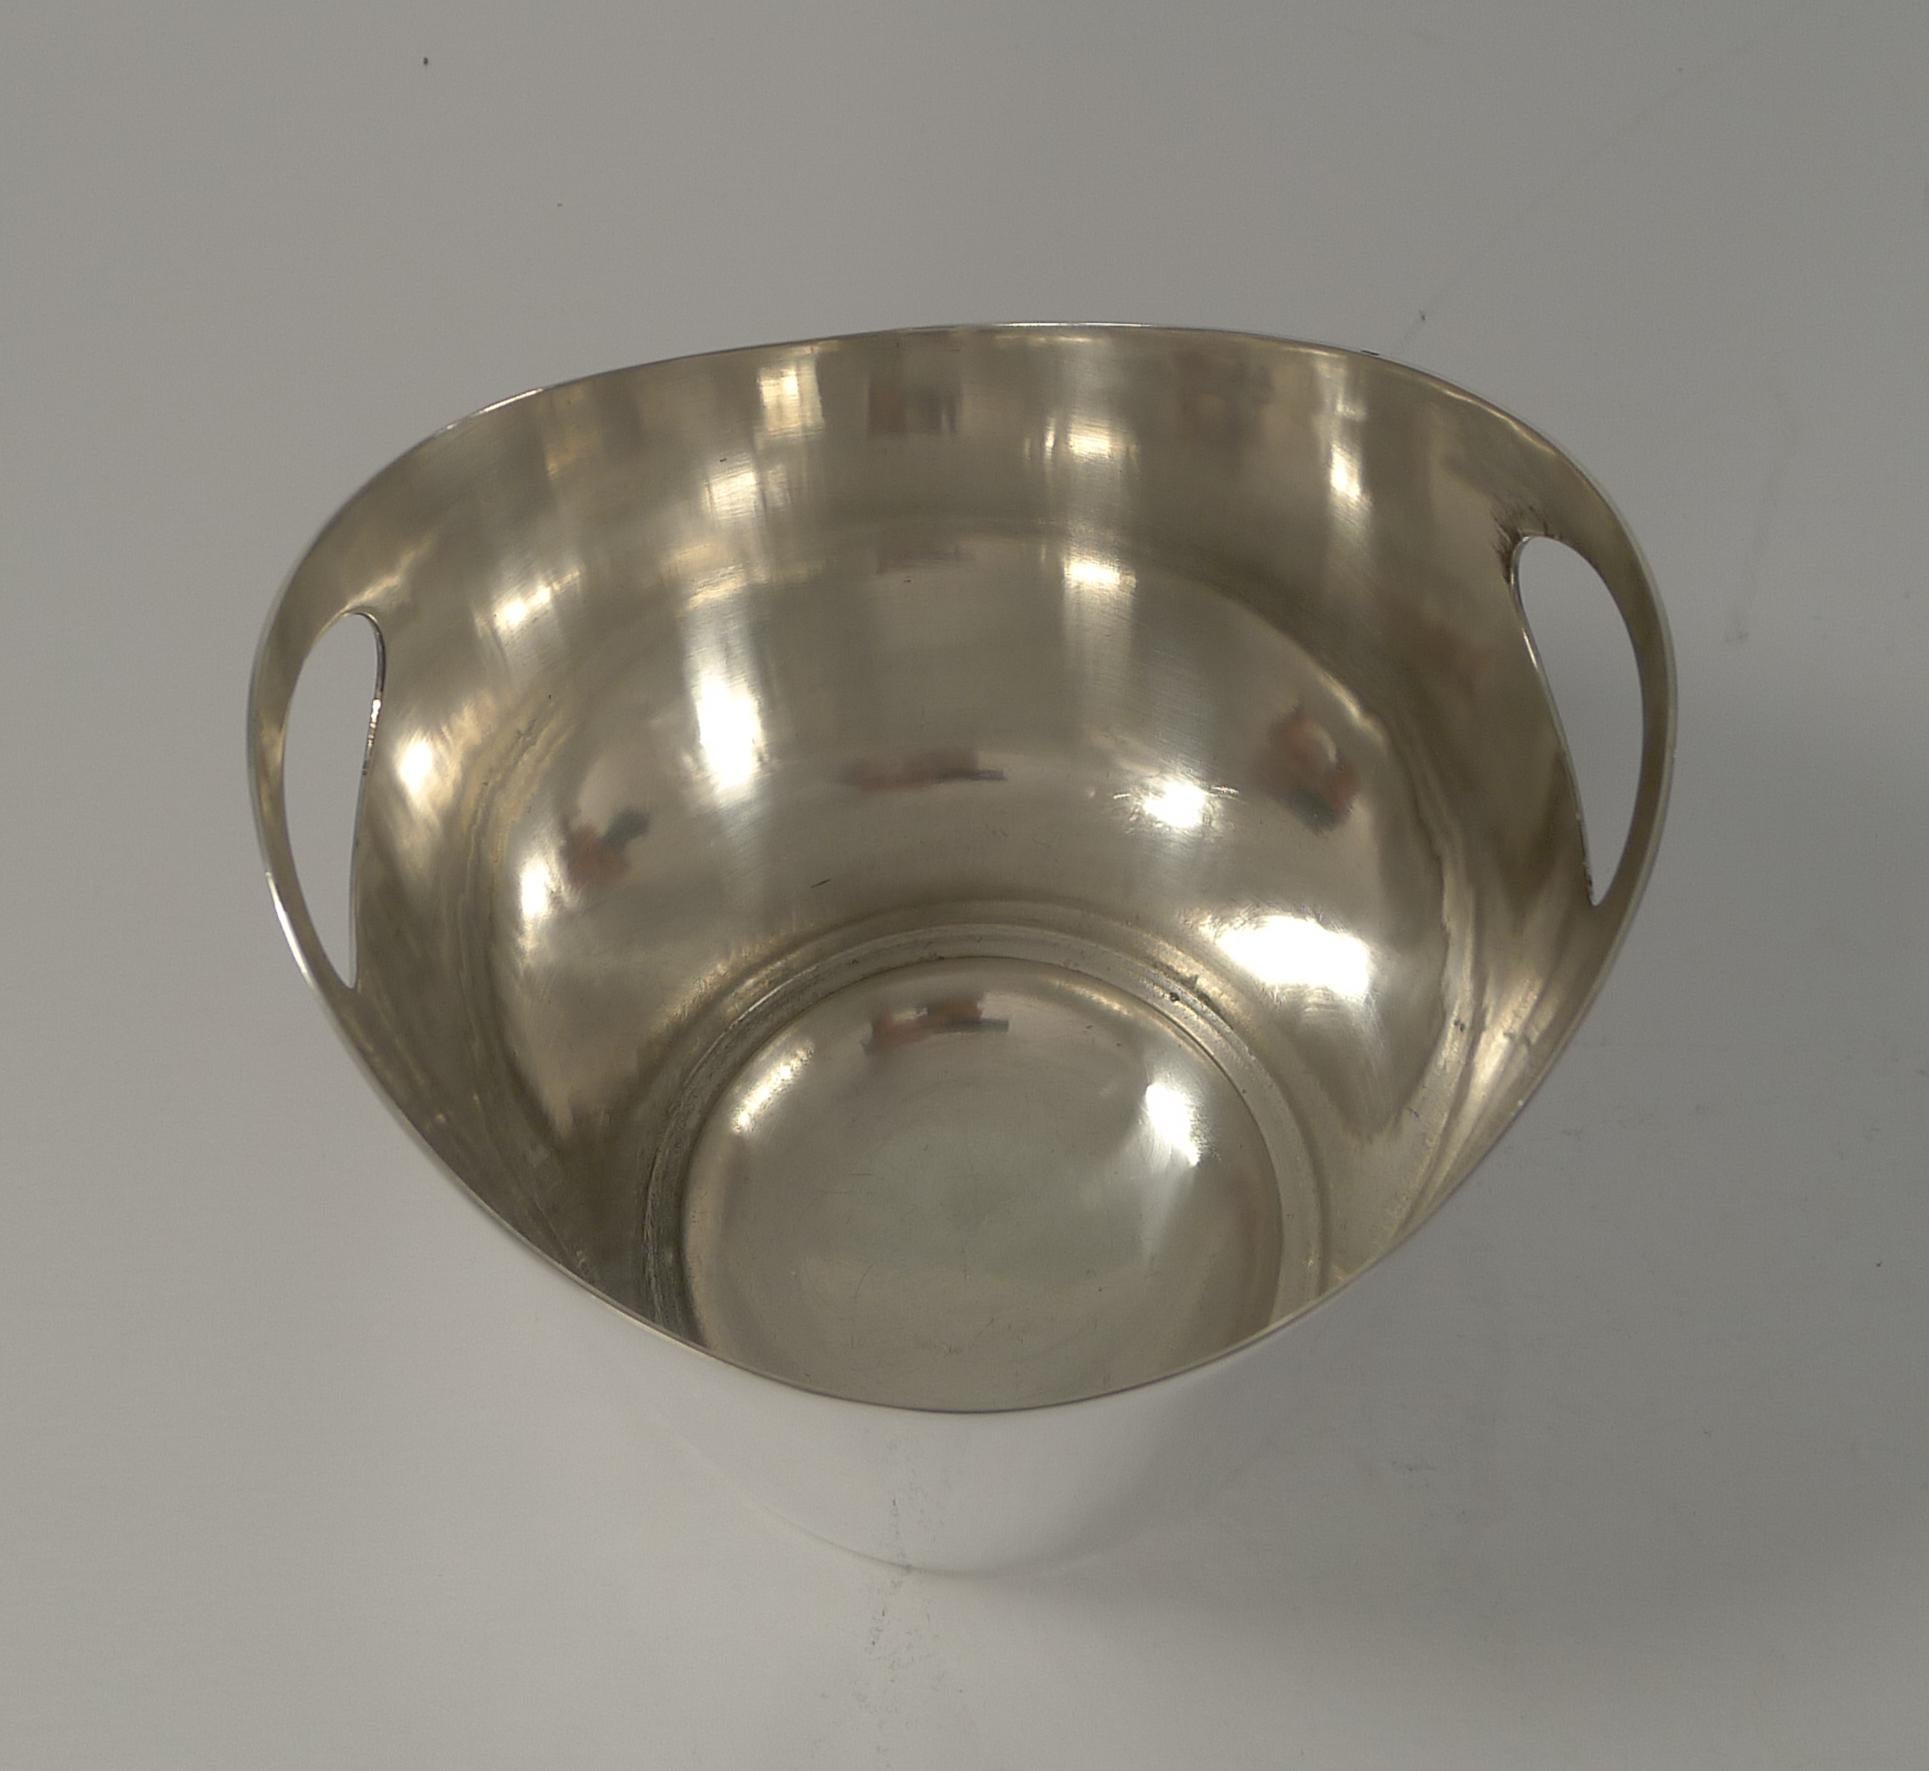 A fabulous and most unusual ice bucket in a clean modern midcentury design by the top notch Sheffield silversmith, Walker and Hall.

Just back from our silversmith having been professionally cleaned and polished, the stylish shape has cut-out